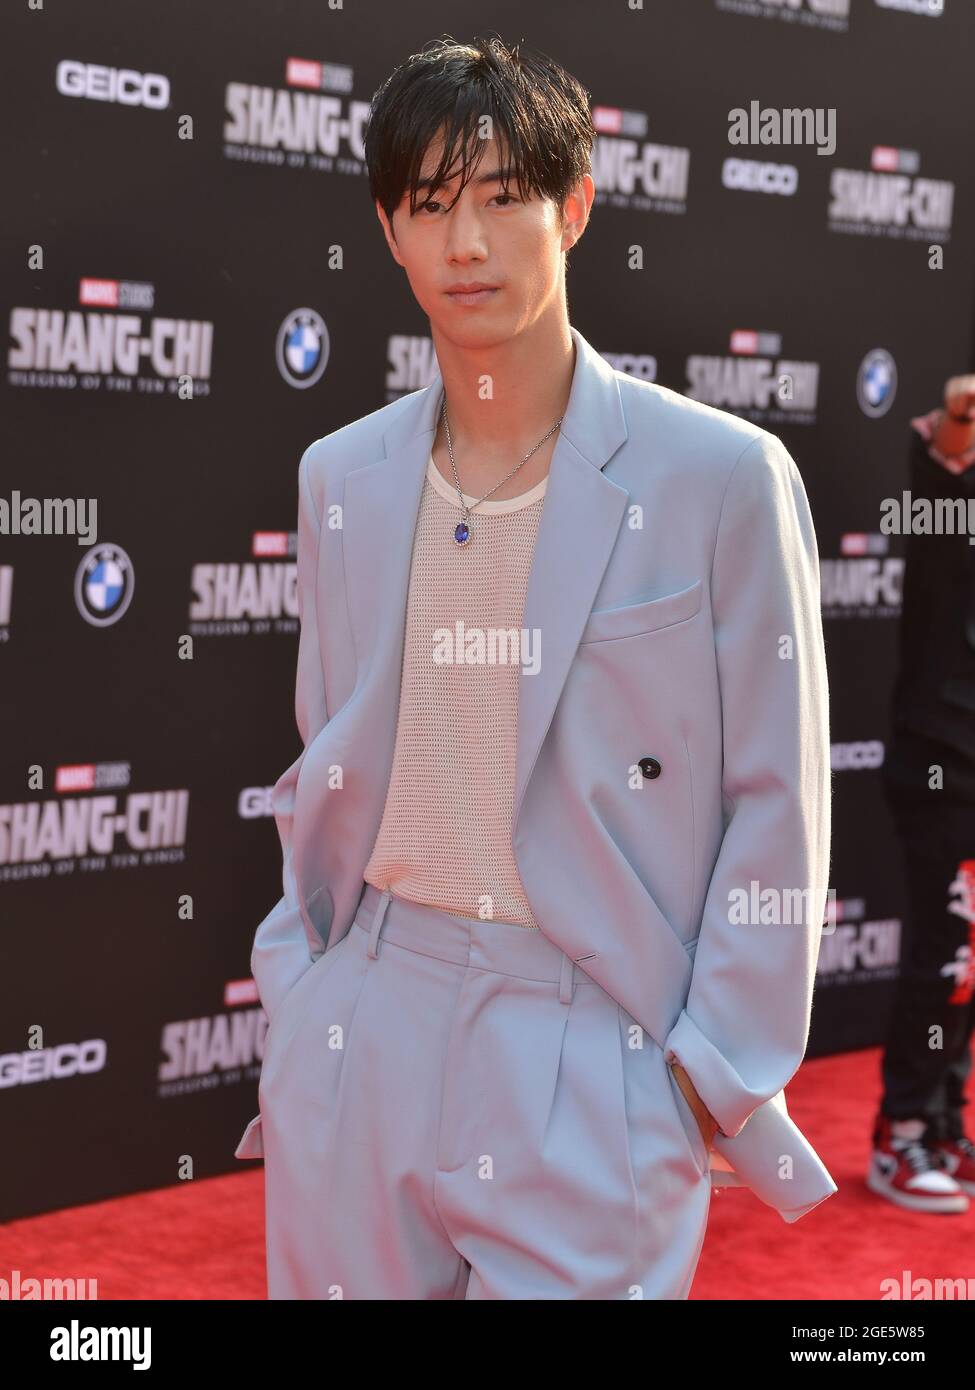 Los Angeles, USA. 17th Aug, 2021. Mark Tuan attends the Disney Marvel Premiere of Shang-Chi and the Legend of the Ten Rings at the El Capitan Theatre in Los Angeles. August 16, 2021. Credit: Tsuni/USA/Alamy Live News Stock Photo